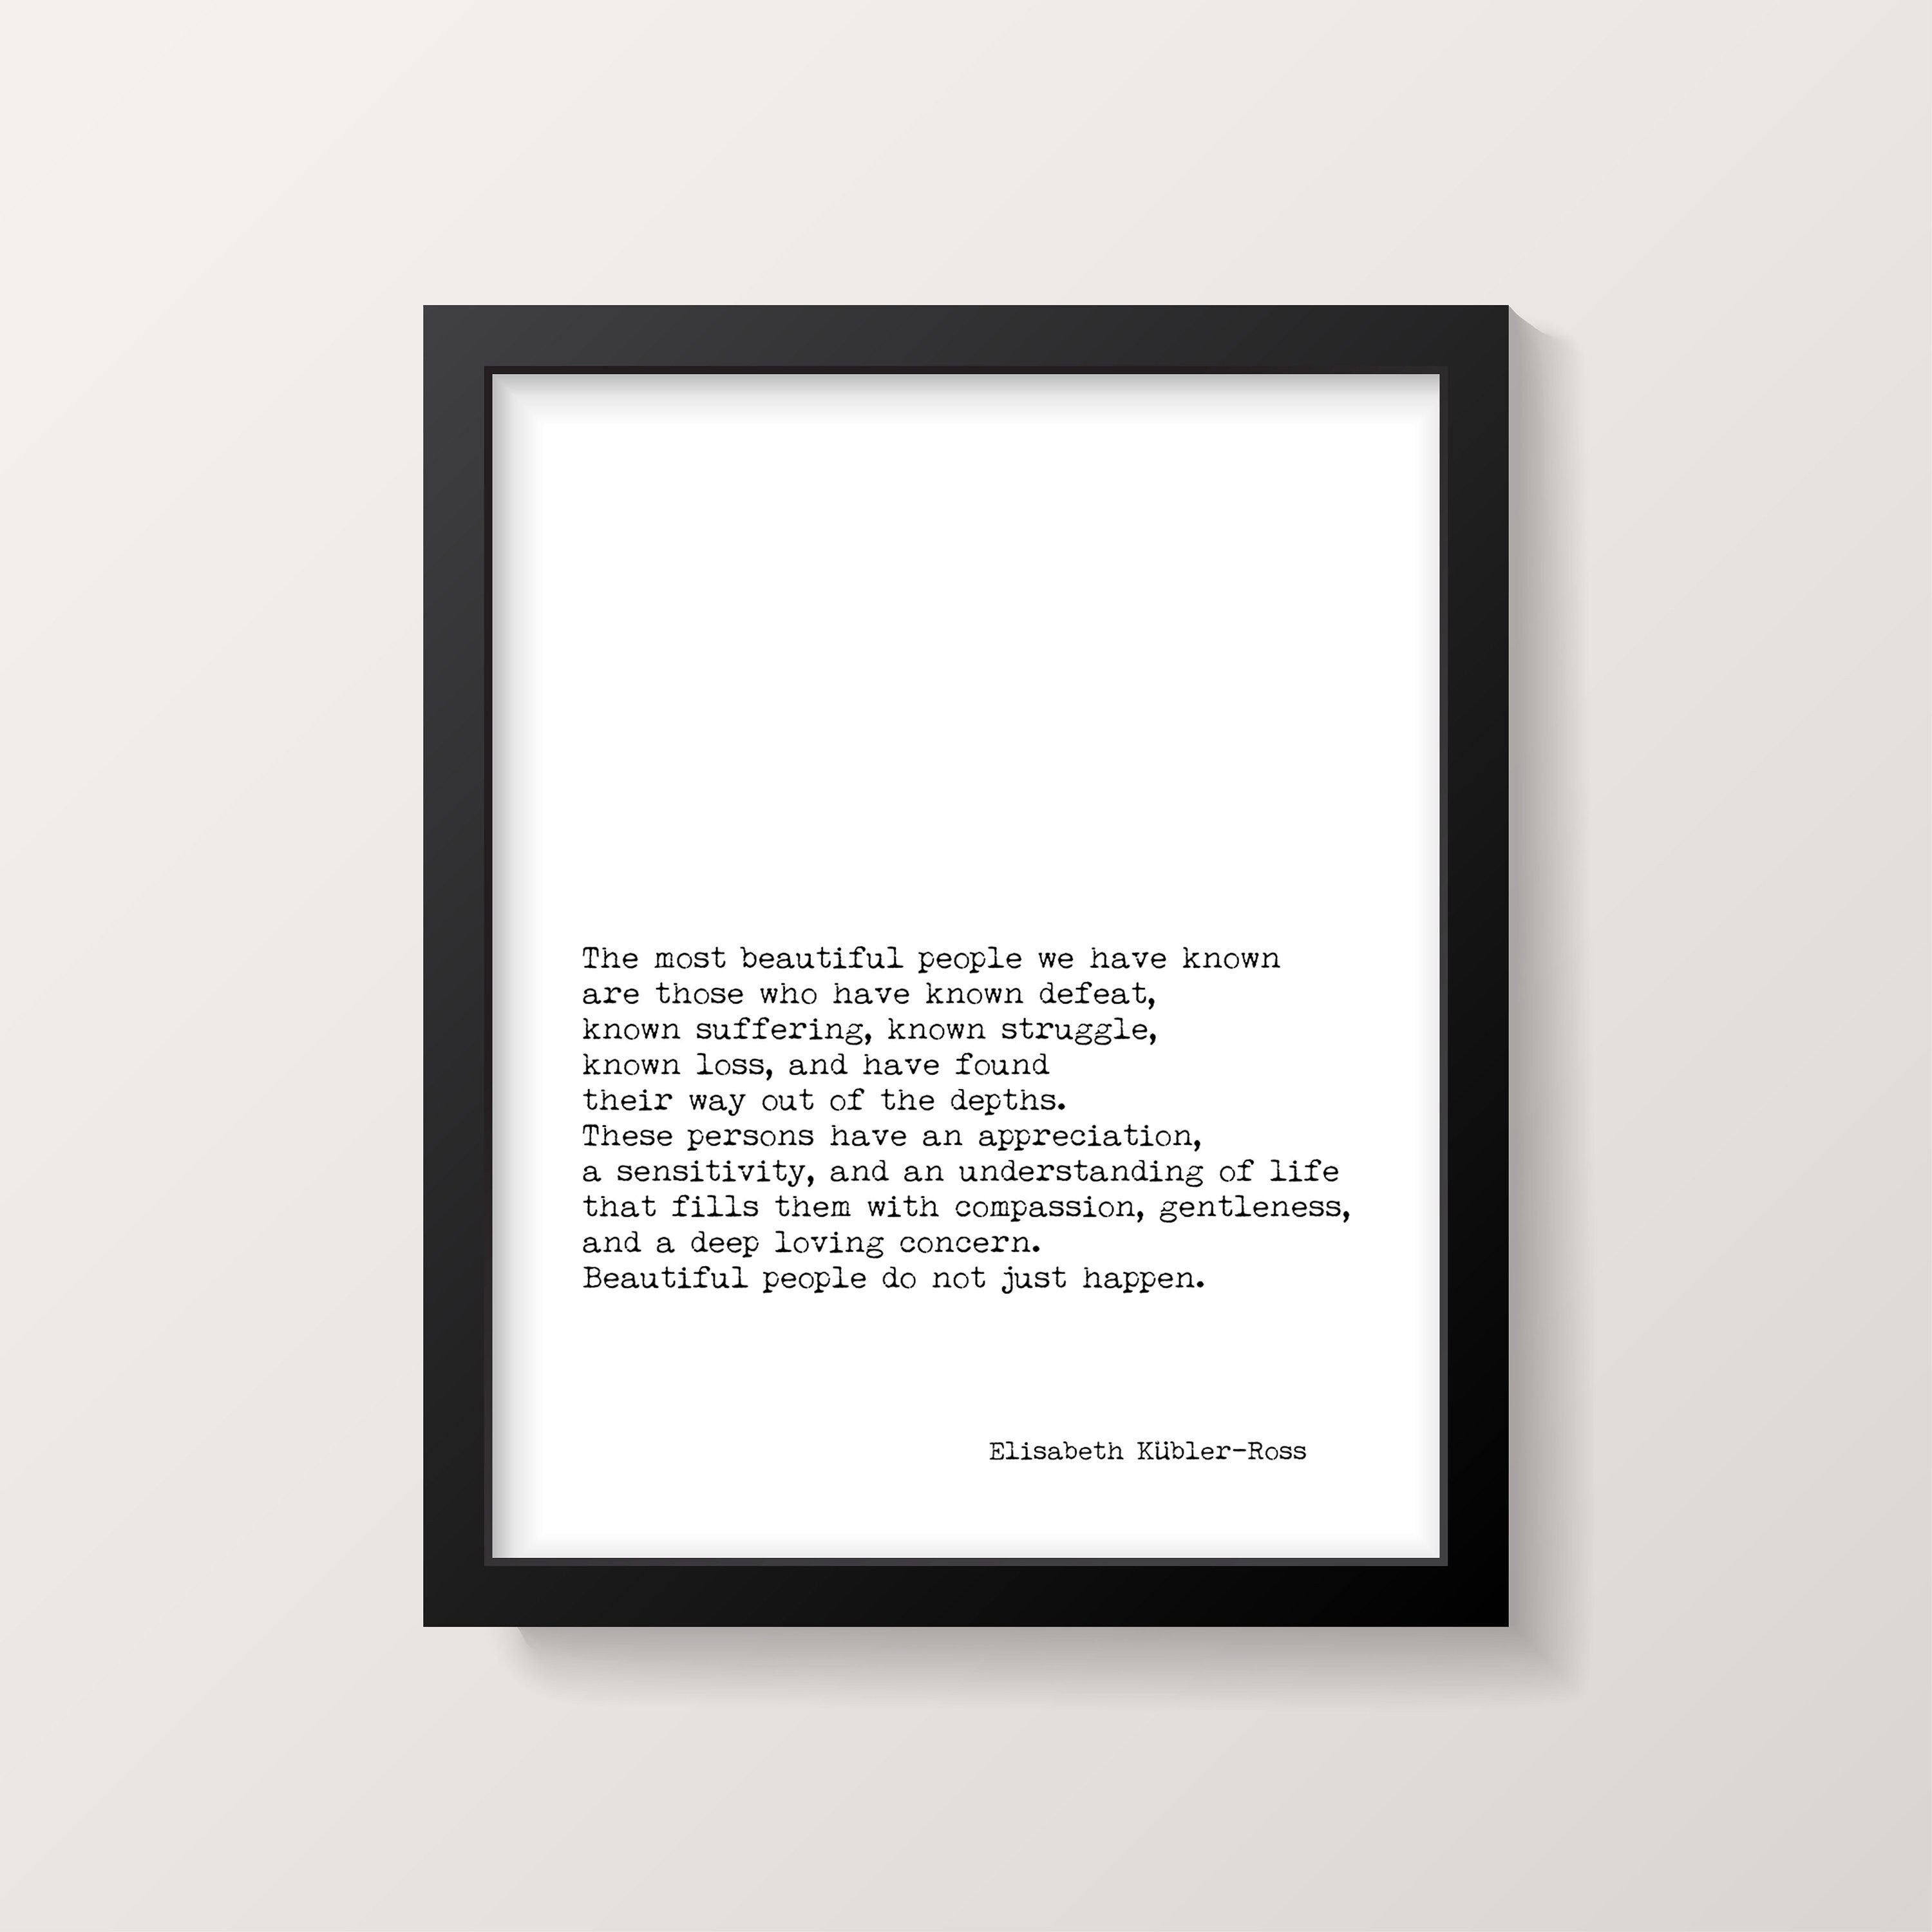 Framed Elisabeth Kubler-Ross Quote Print, The Most Beautiful People Inspirational Art in Black & White for Home Wall Decor